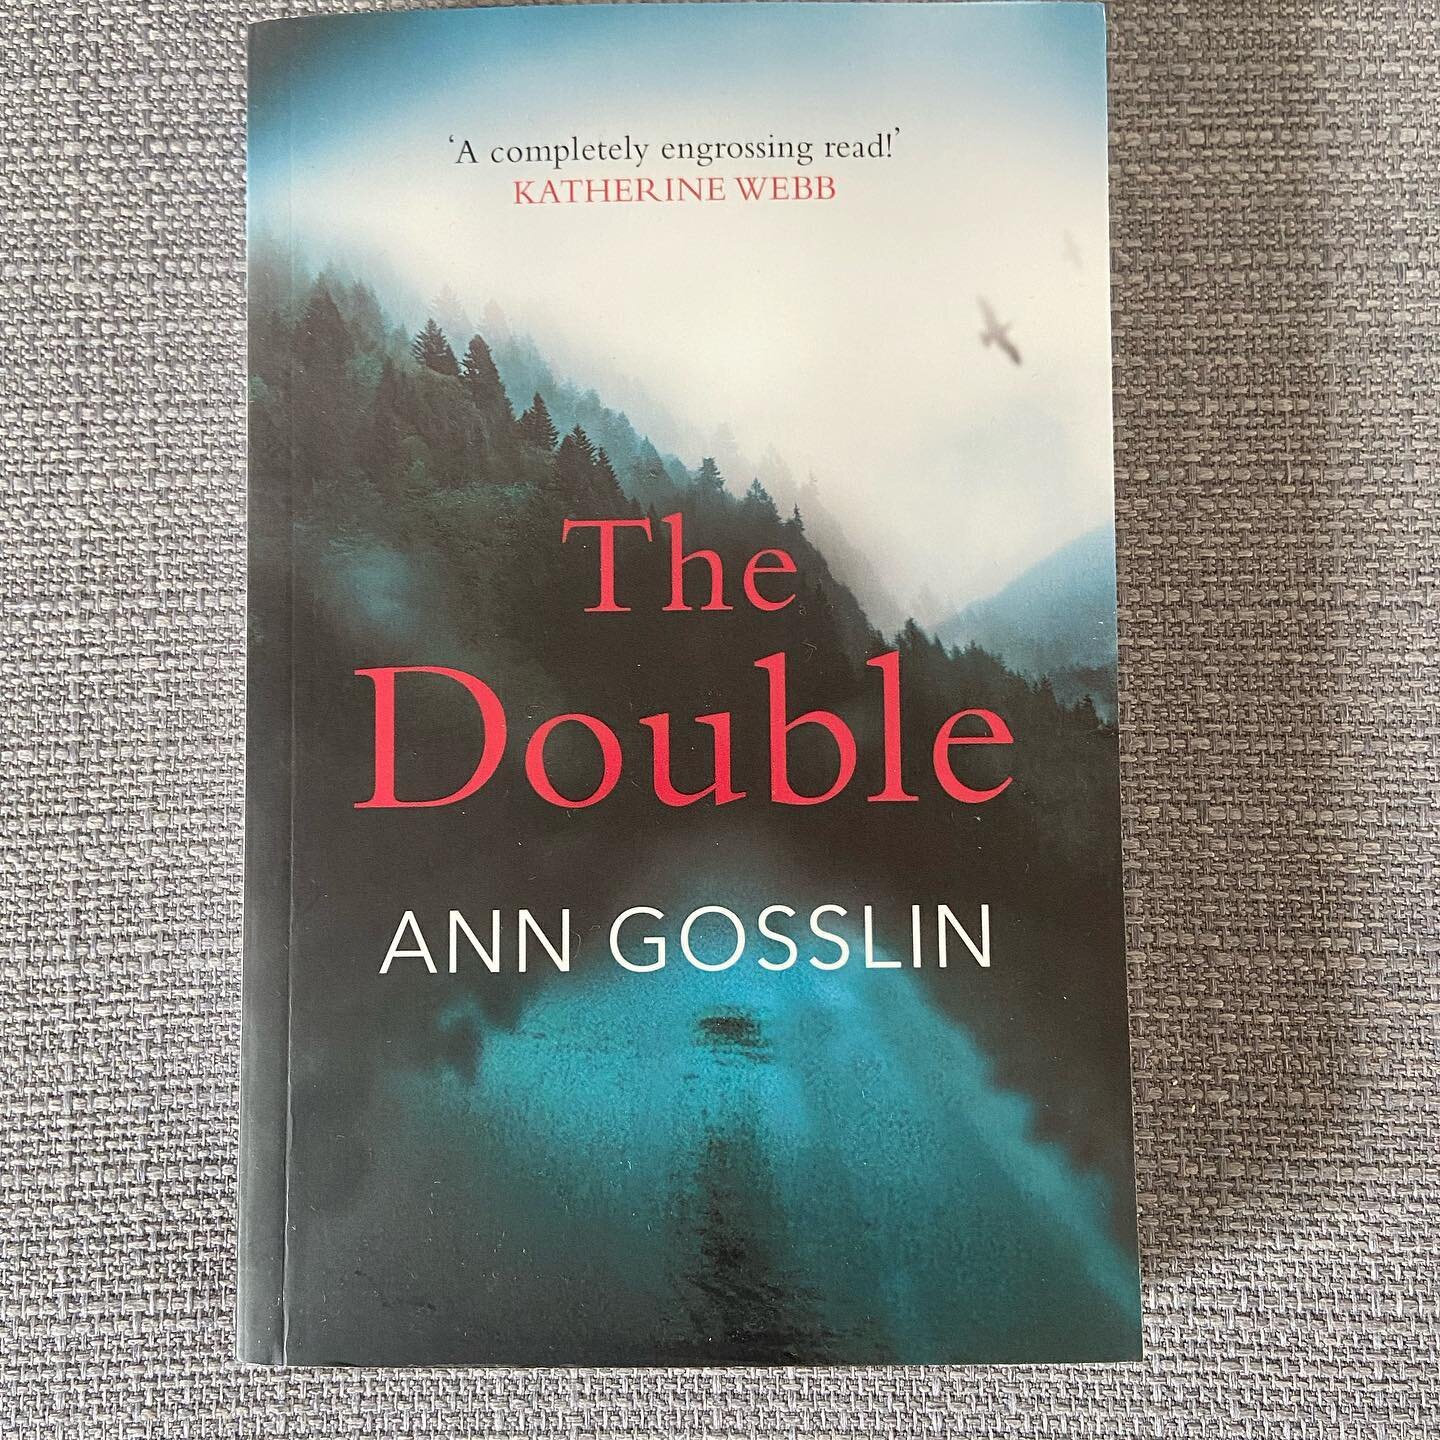 How good is this haunting cover? Huge thanks to @legend_times for sending #TheDouble, which looks deliciously creepy.